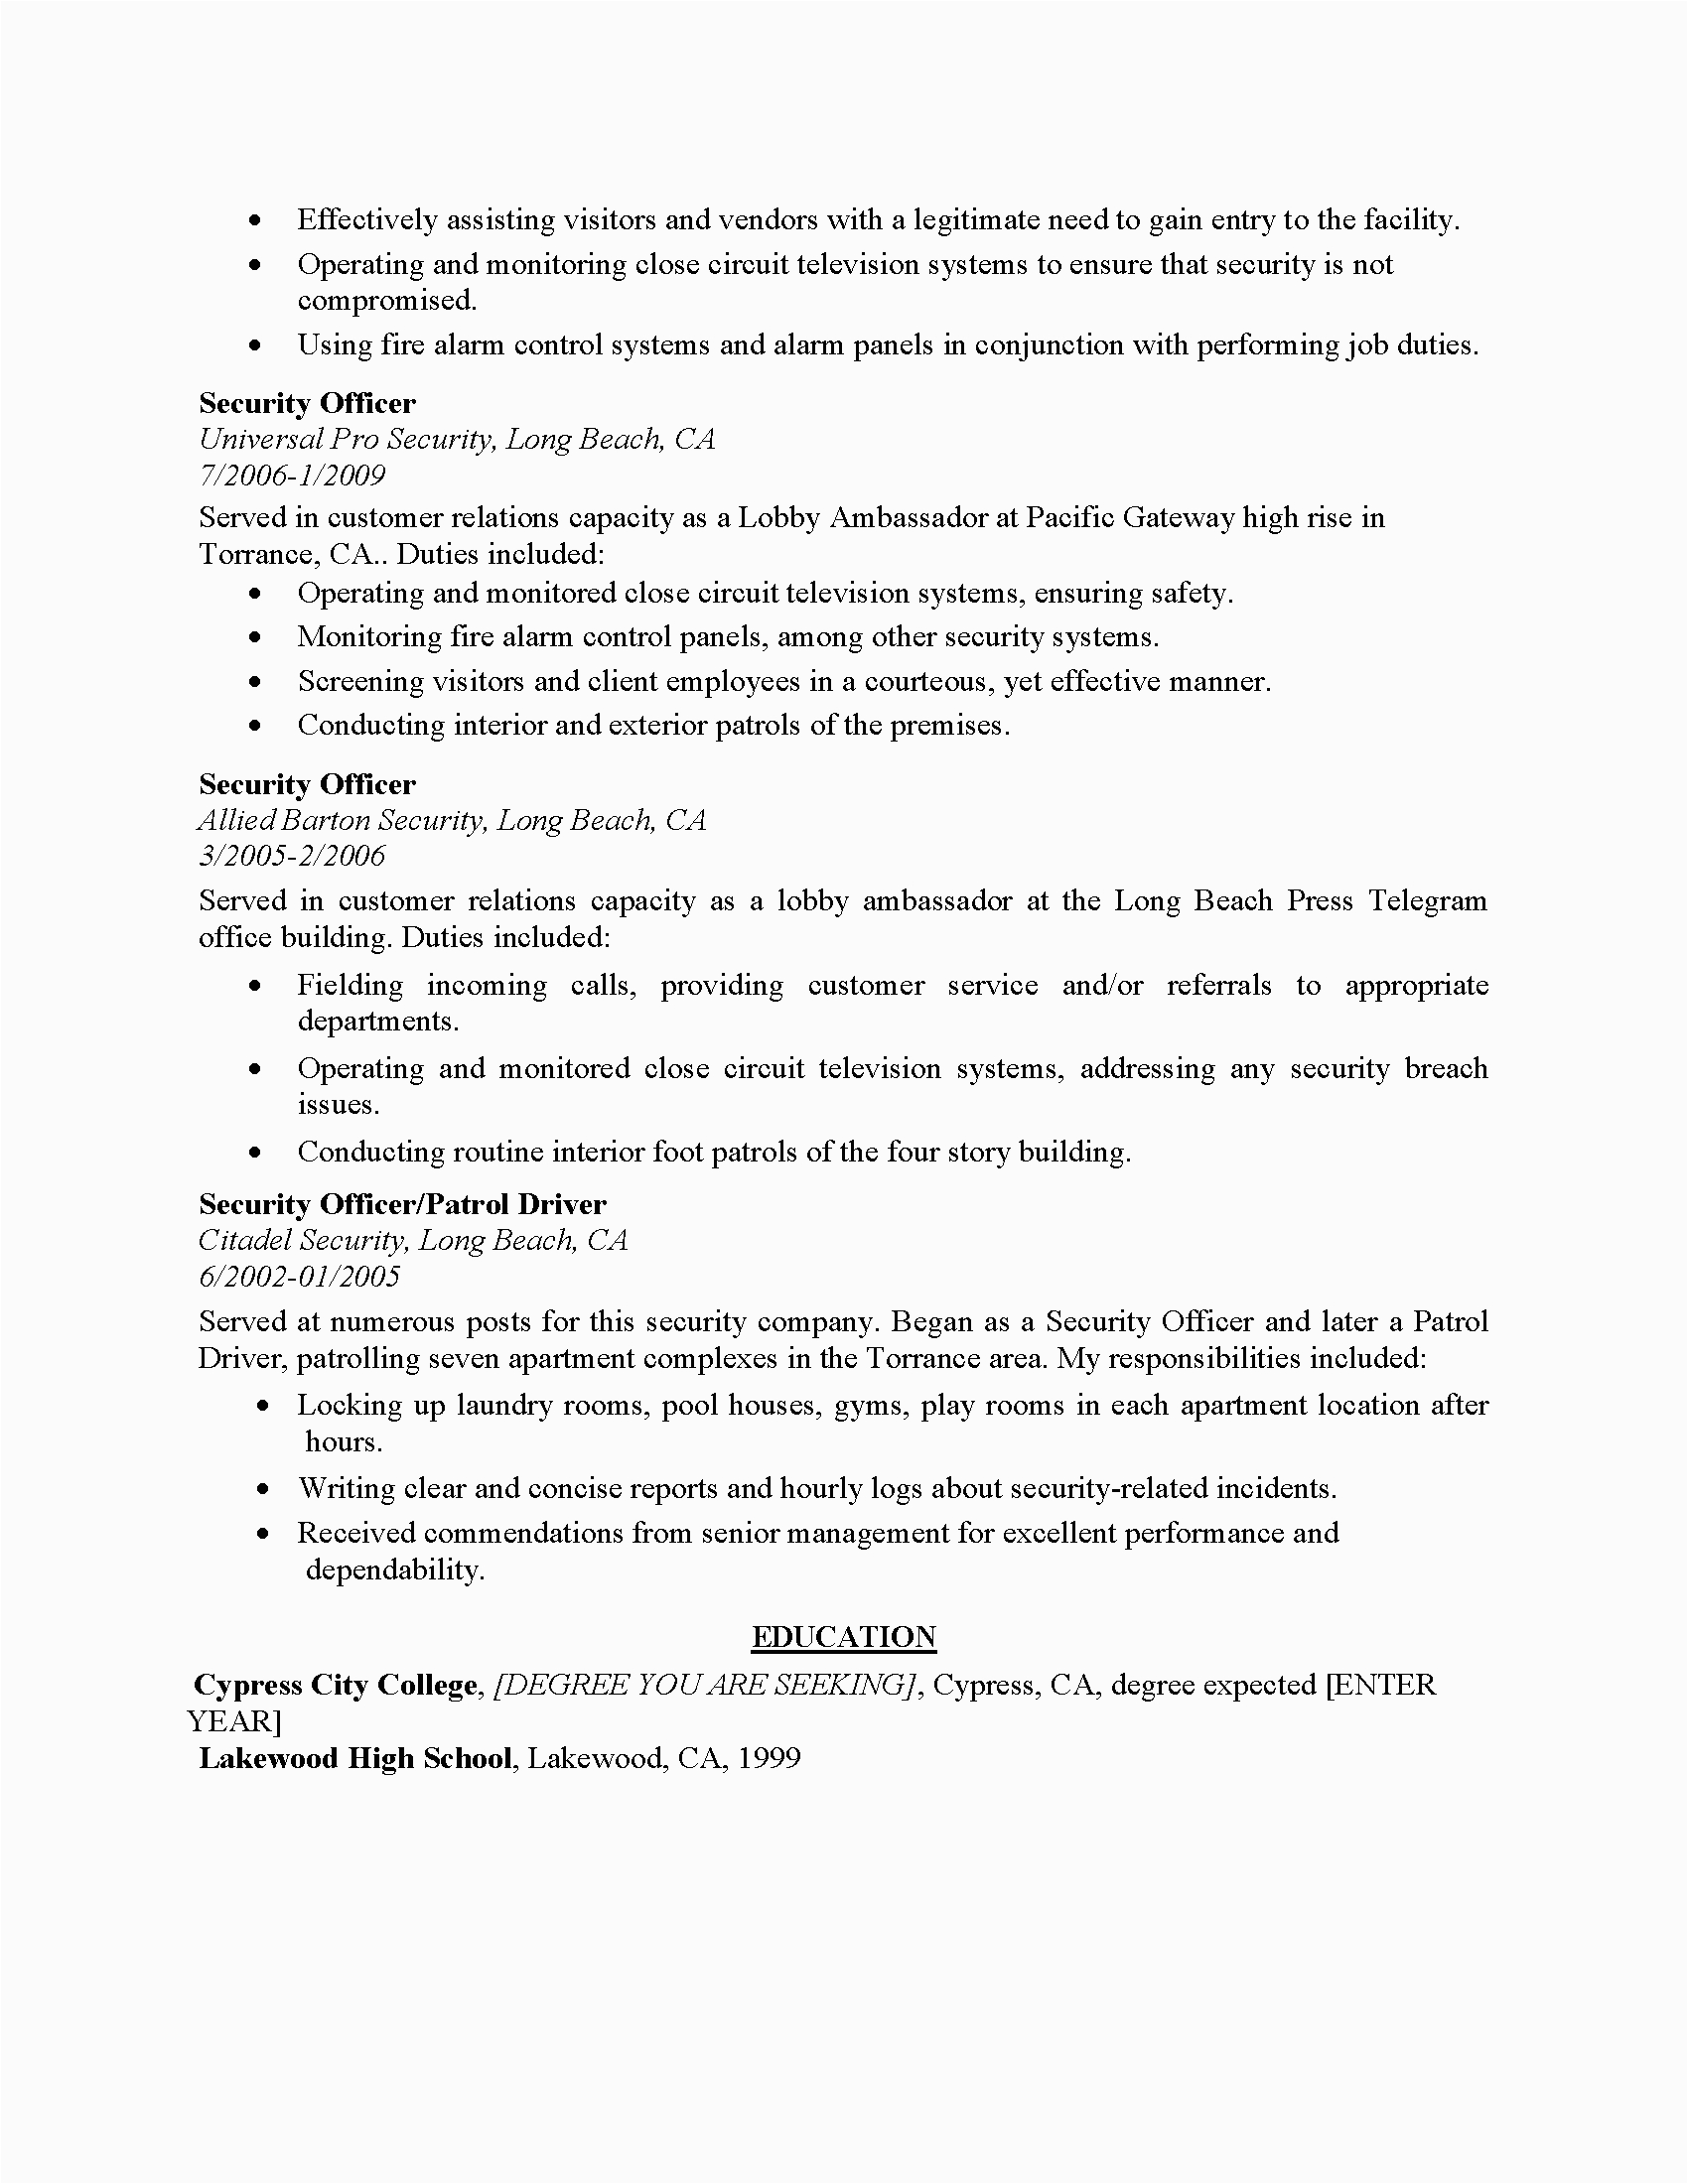 Data Warehouse Project Manager Resume Sample Resume Warehouse Manager Sample for Data Project Samples